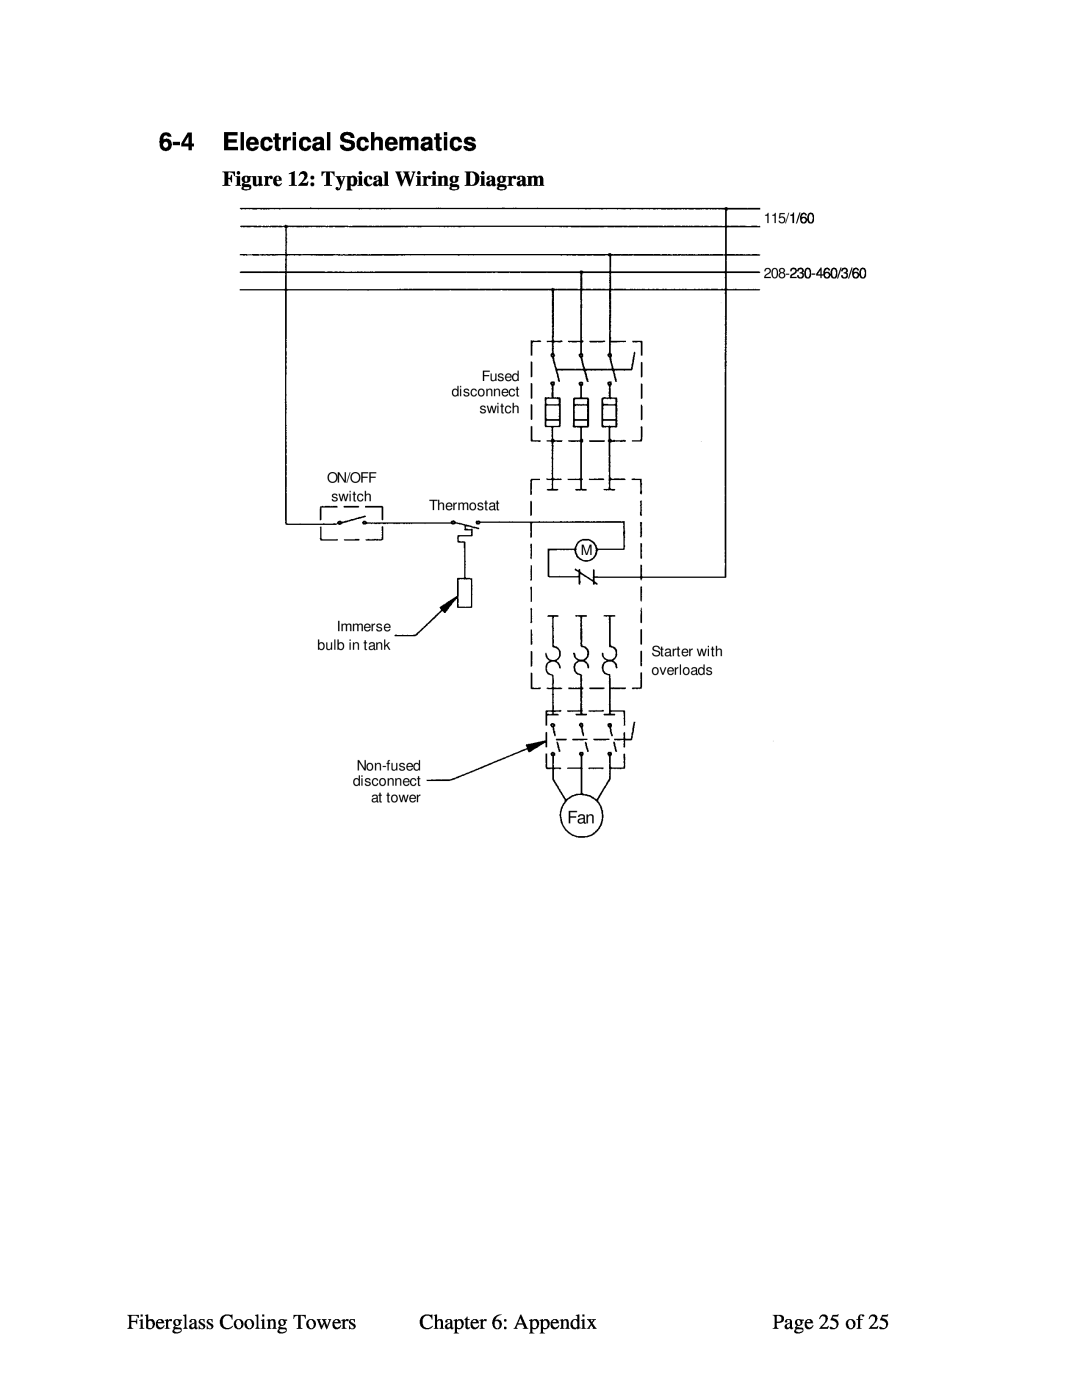 Sterling 882.00440.00 SC6-610.6 6-4Electrical Schematics, Typical Wiring Diagram, ON/OFF switch Immerse bulb in tank 